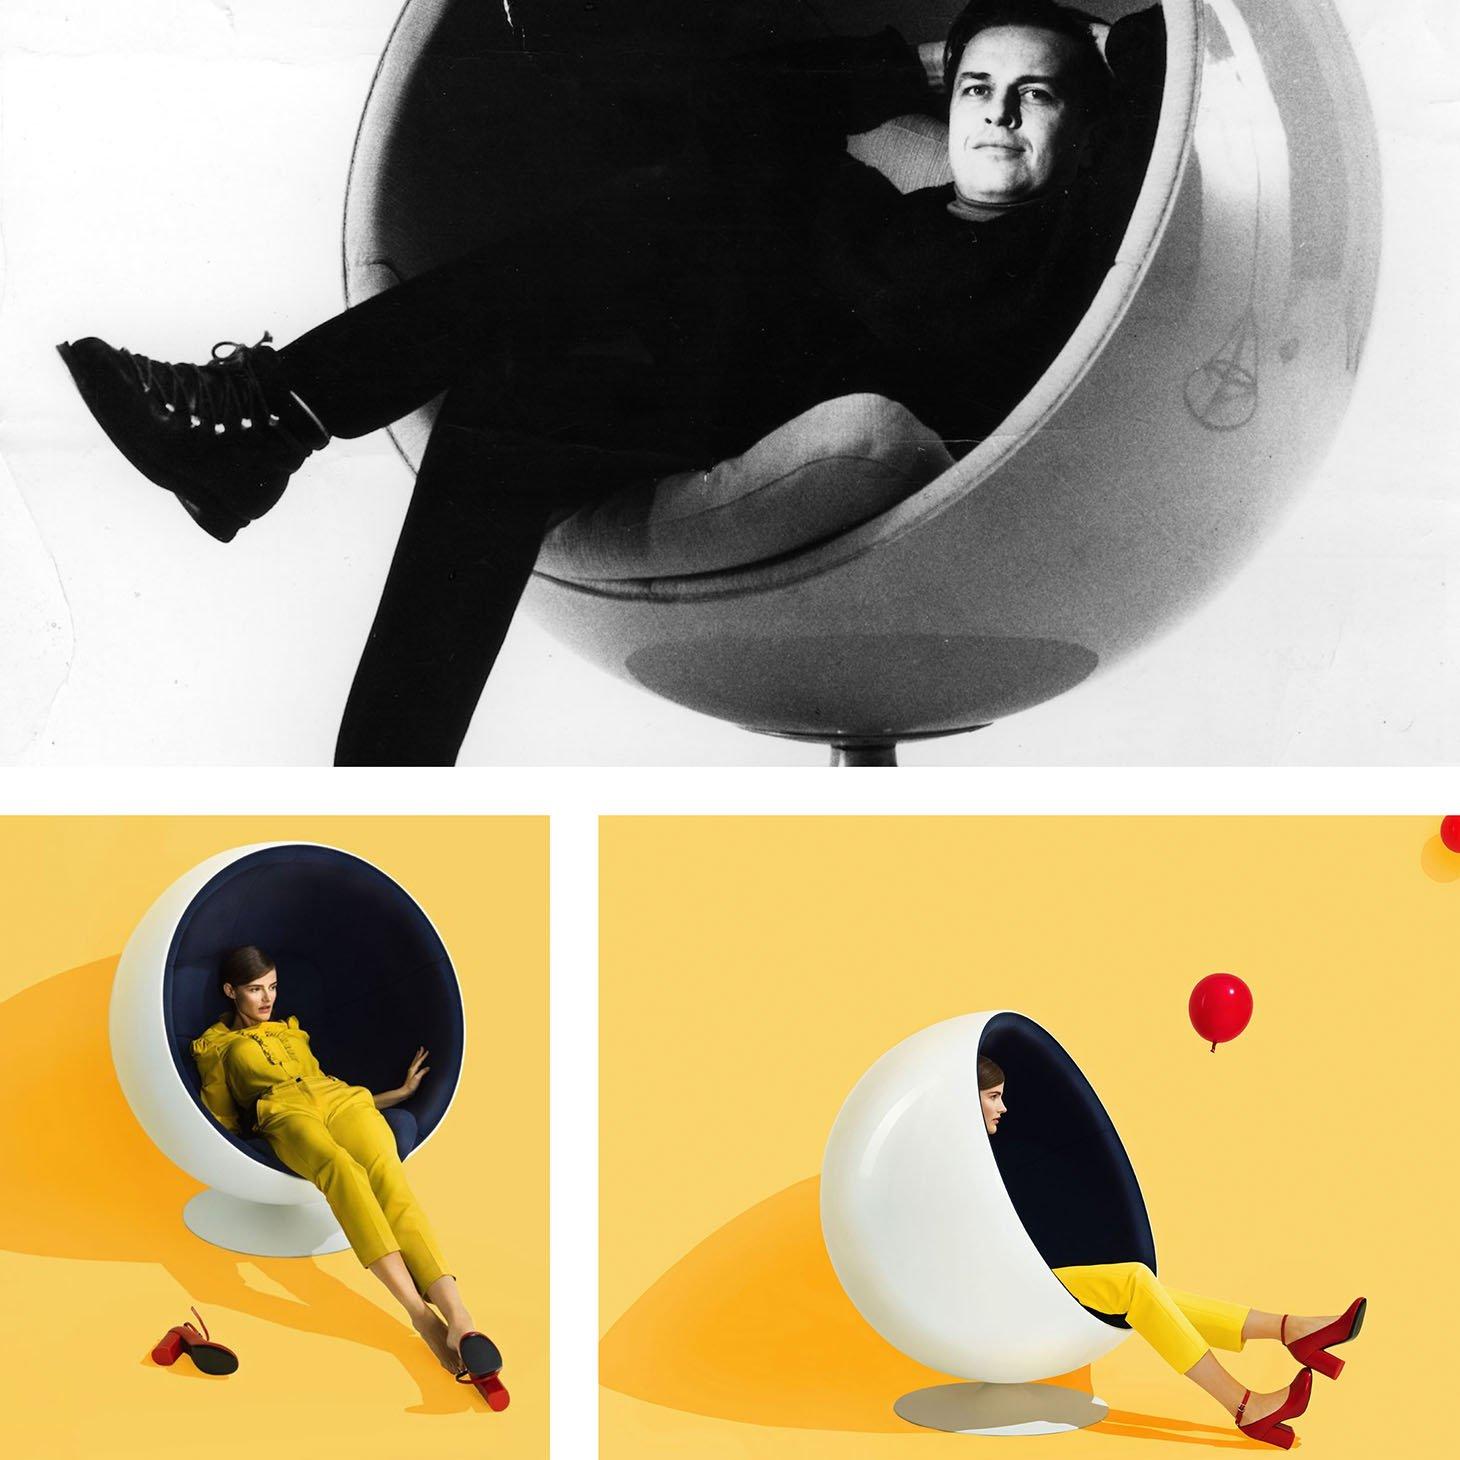 The ball chair was designed in 1963 and debuted at the Cologne Furniture Fair in 1966. The chair is one of the most famous and beloved classics of Finnish design and it was the international breakthrough of Eero Aarnio. The ball chair can be found